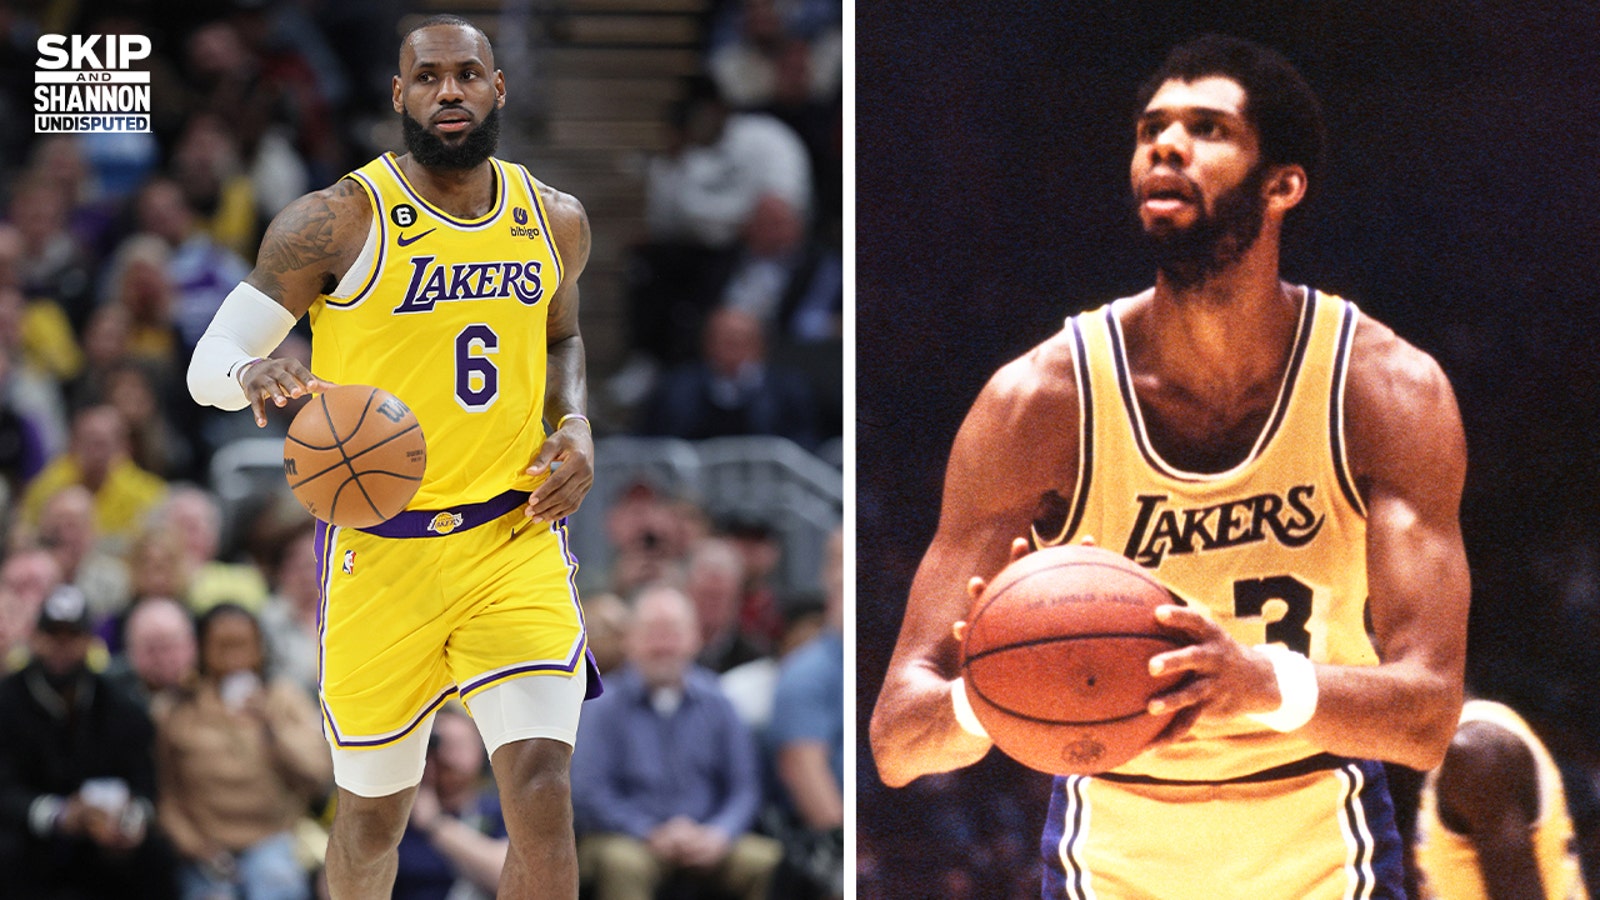 LeBron calls Kareem's scoring record 'one of the greatest records in sports'